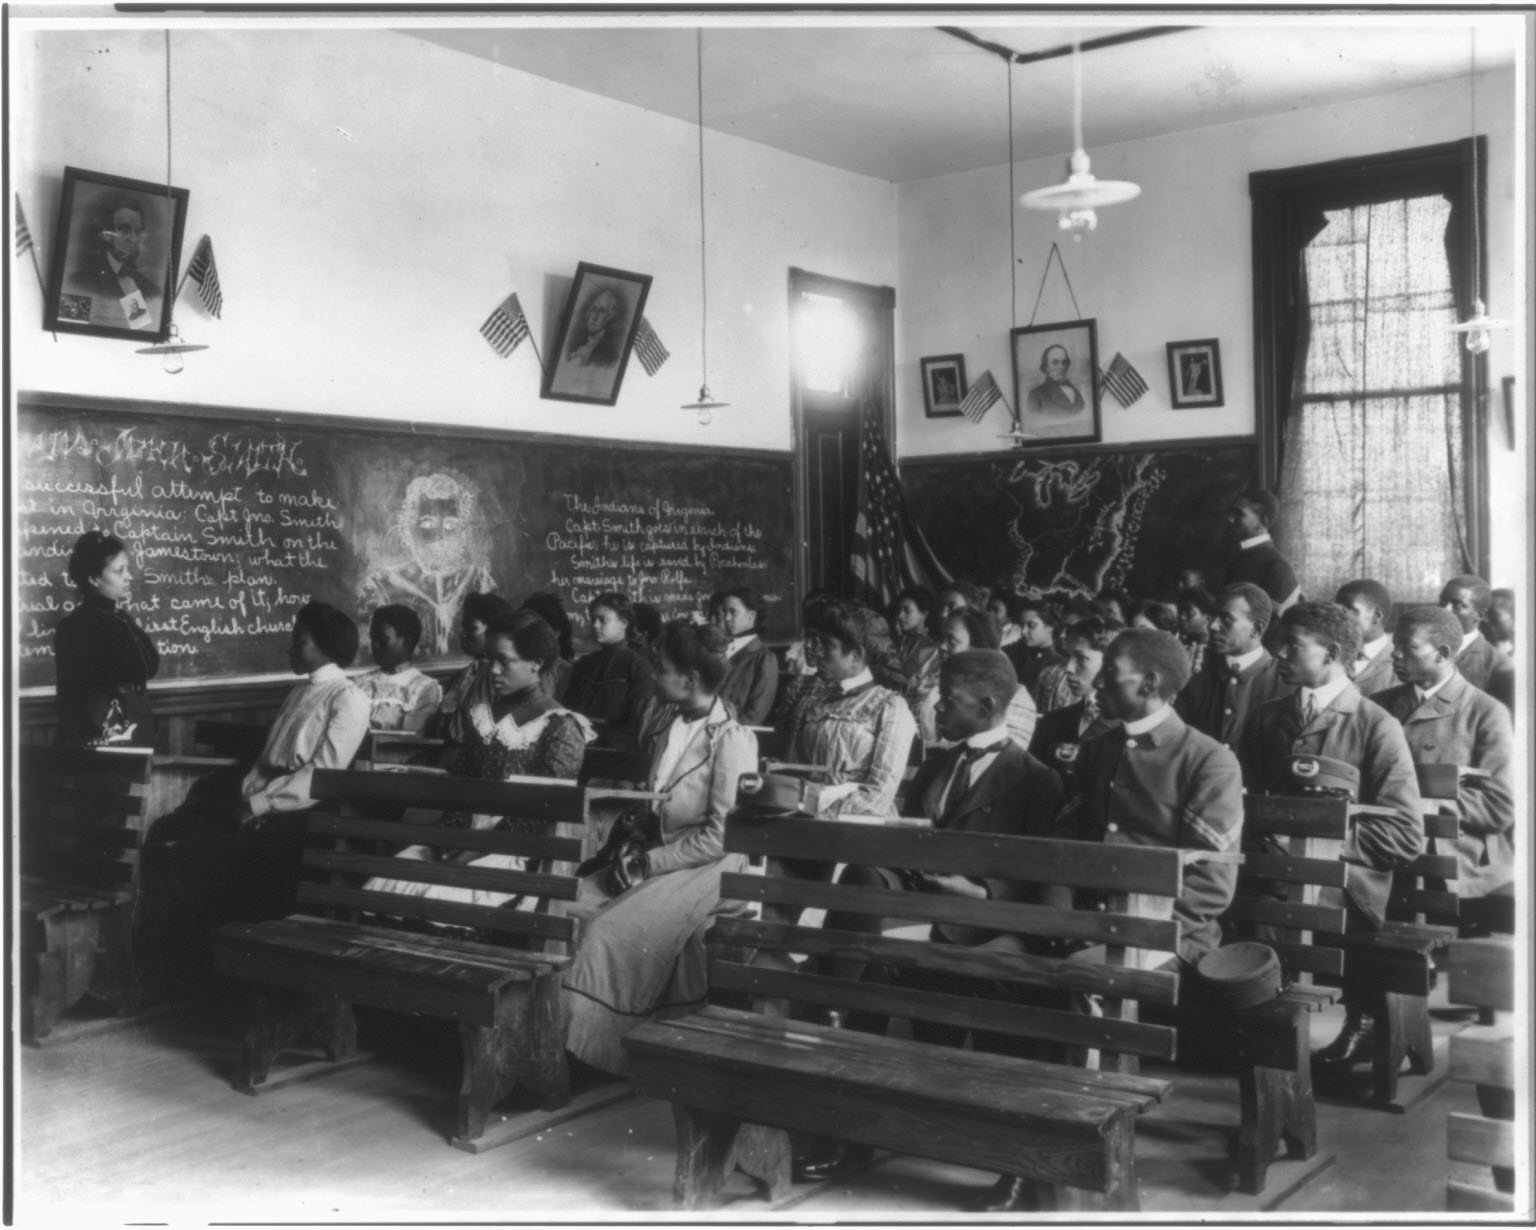 Black and white photograph of a class of young students watching a teacher who stands in front of a blackboard.